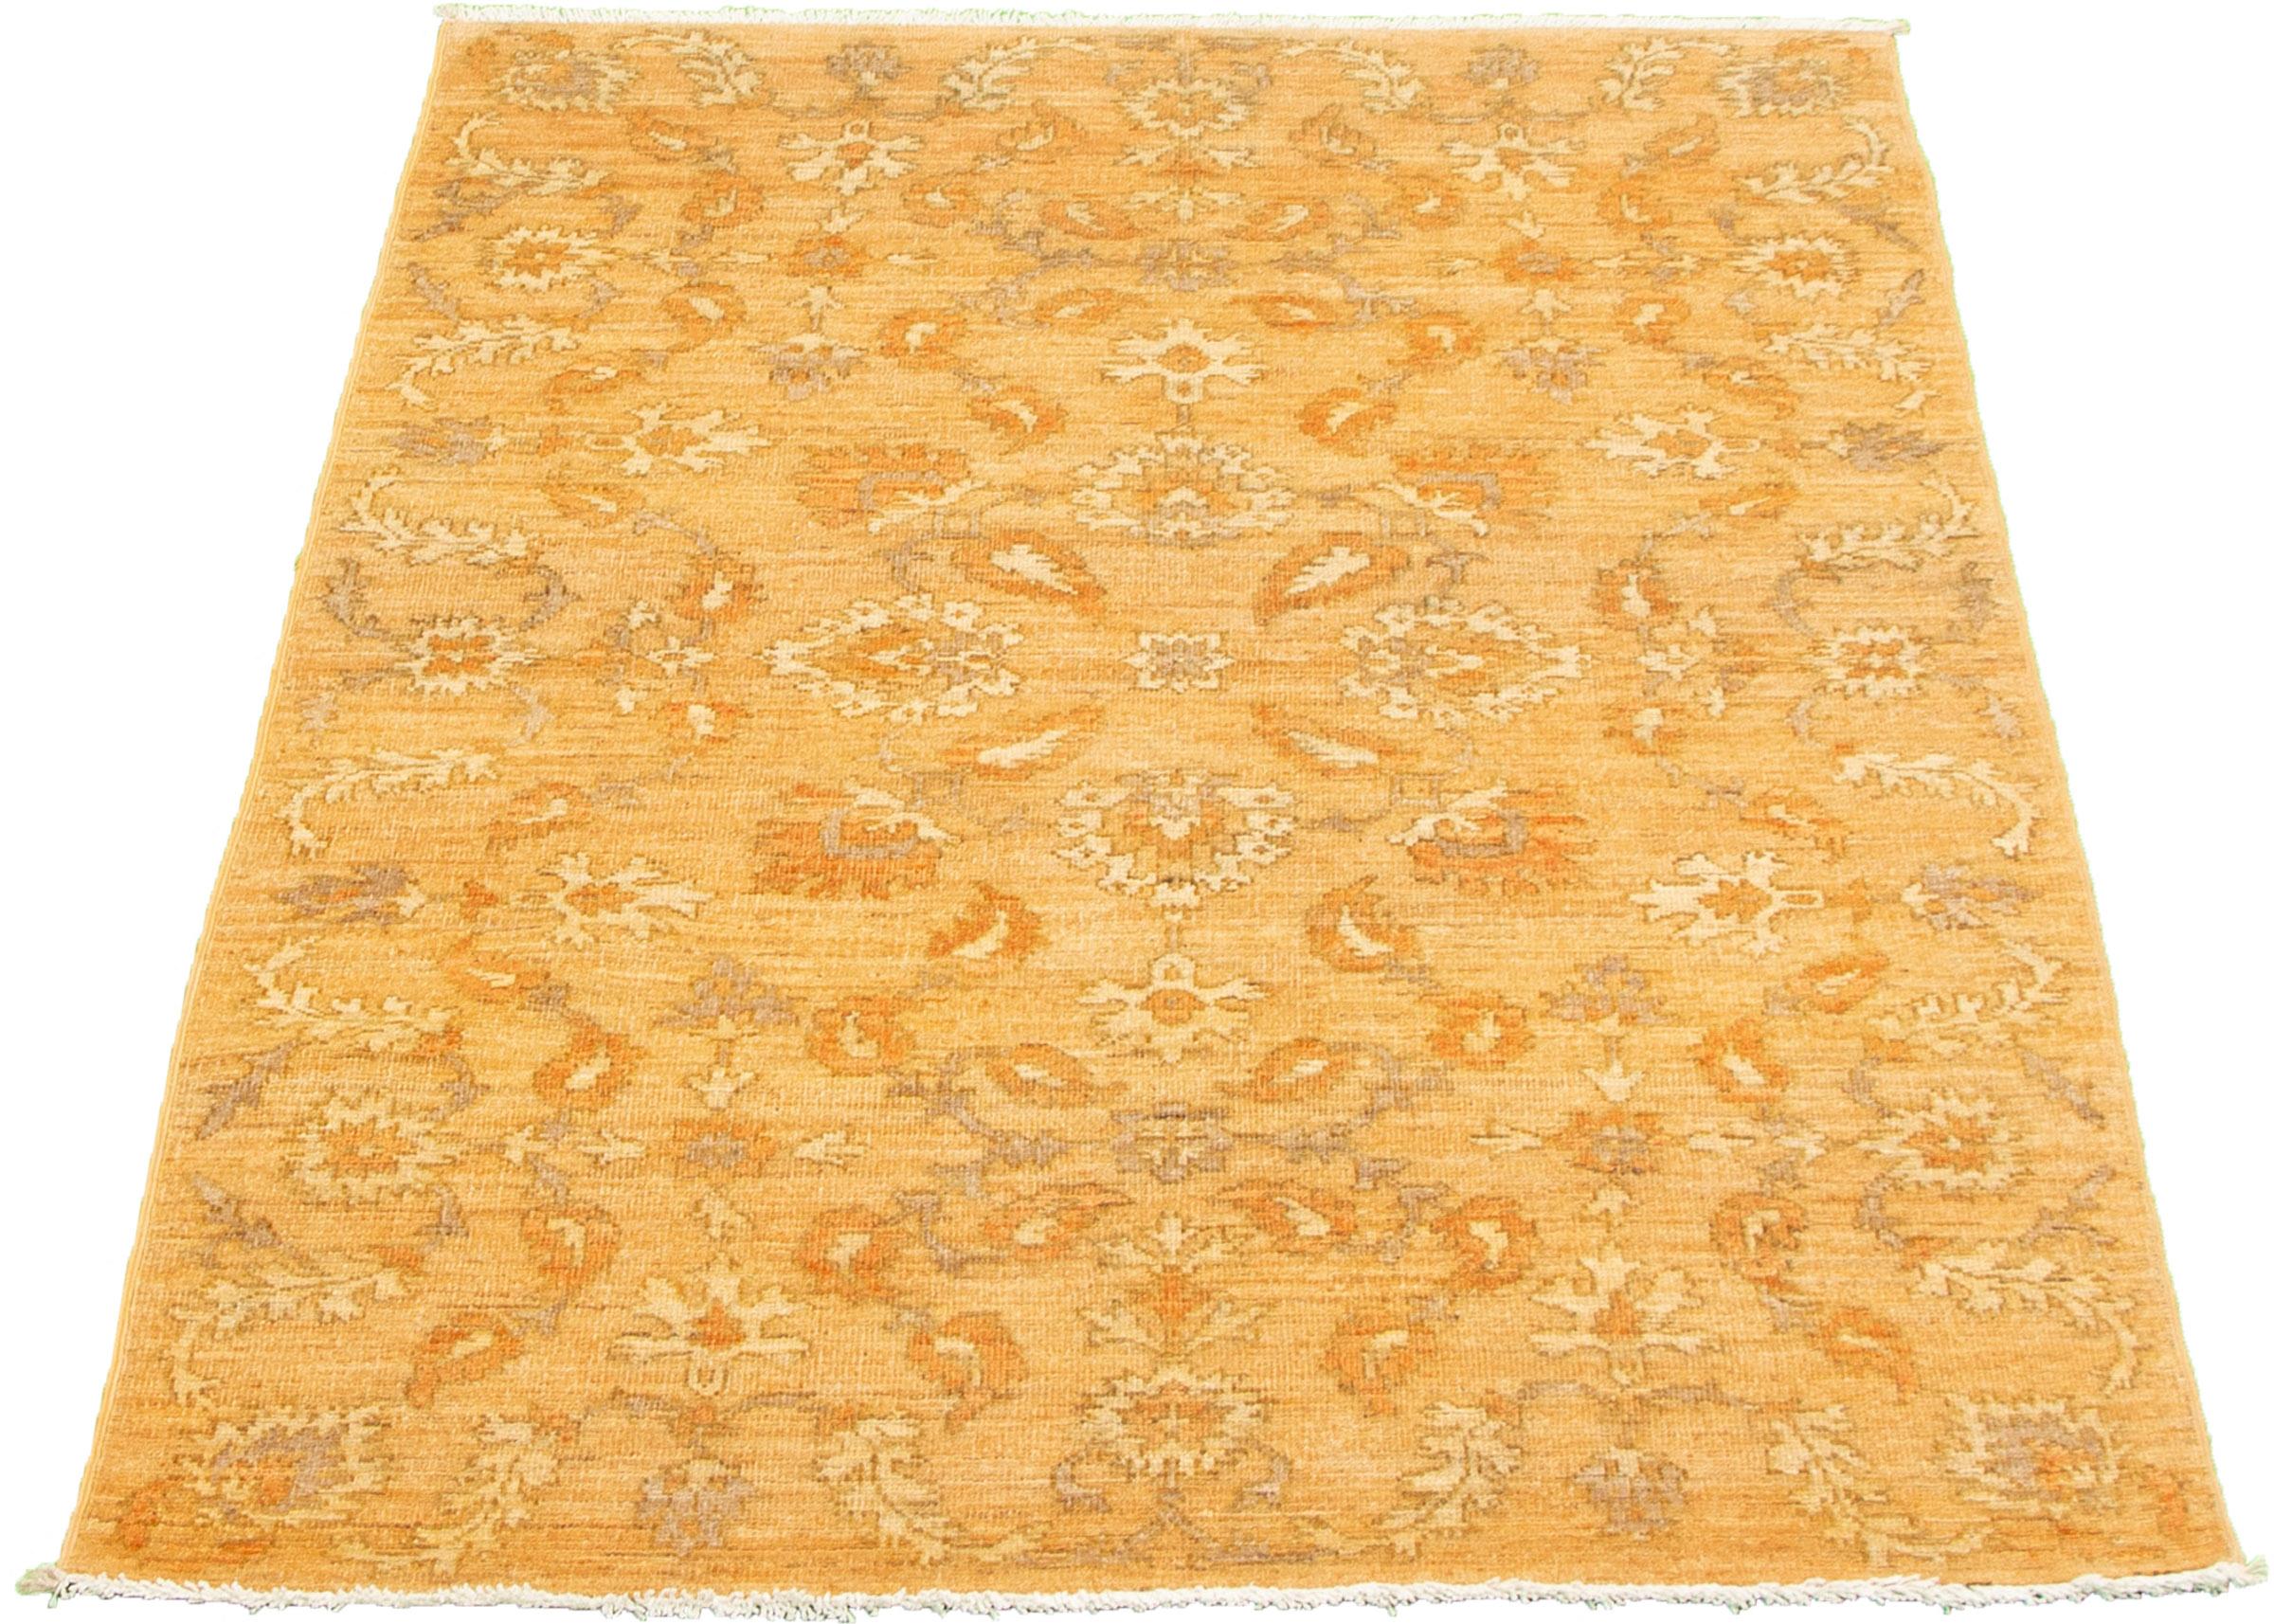 Vegetable Dyed Wool, Hand-Knotted Persian Oushak Rug, Yellow, Taupe, Cream, 4’ x 6’ For Sale